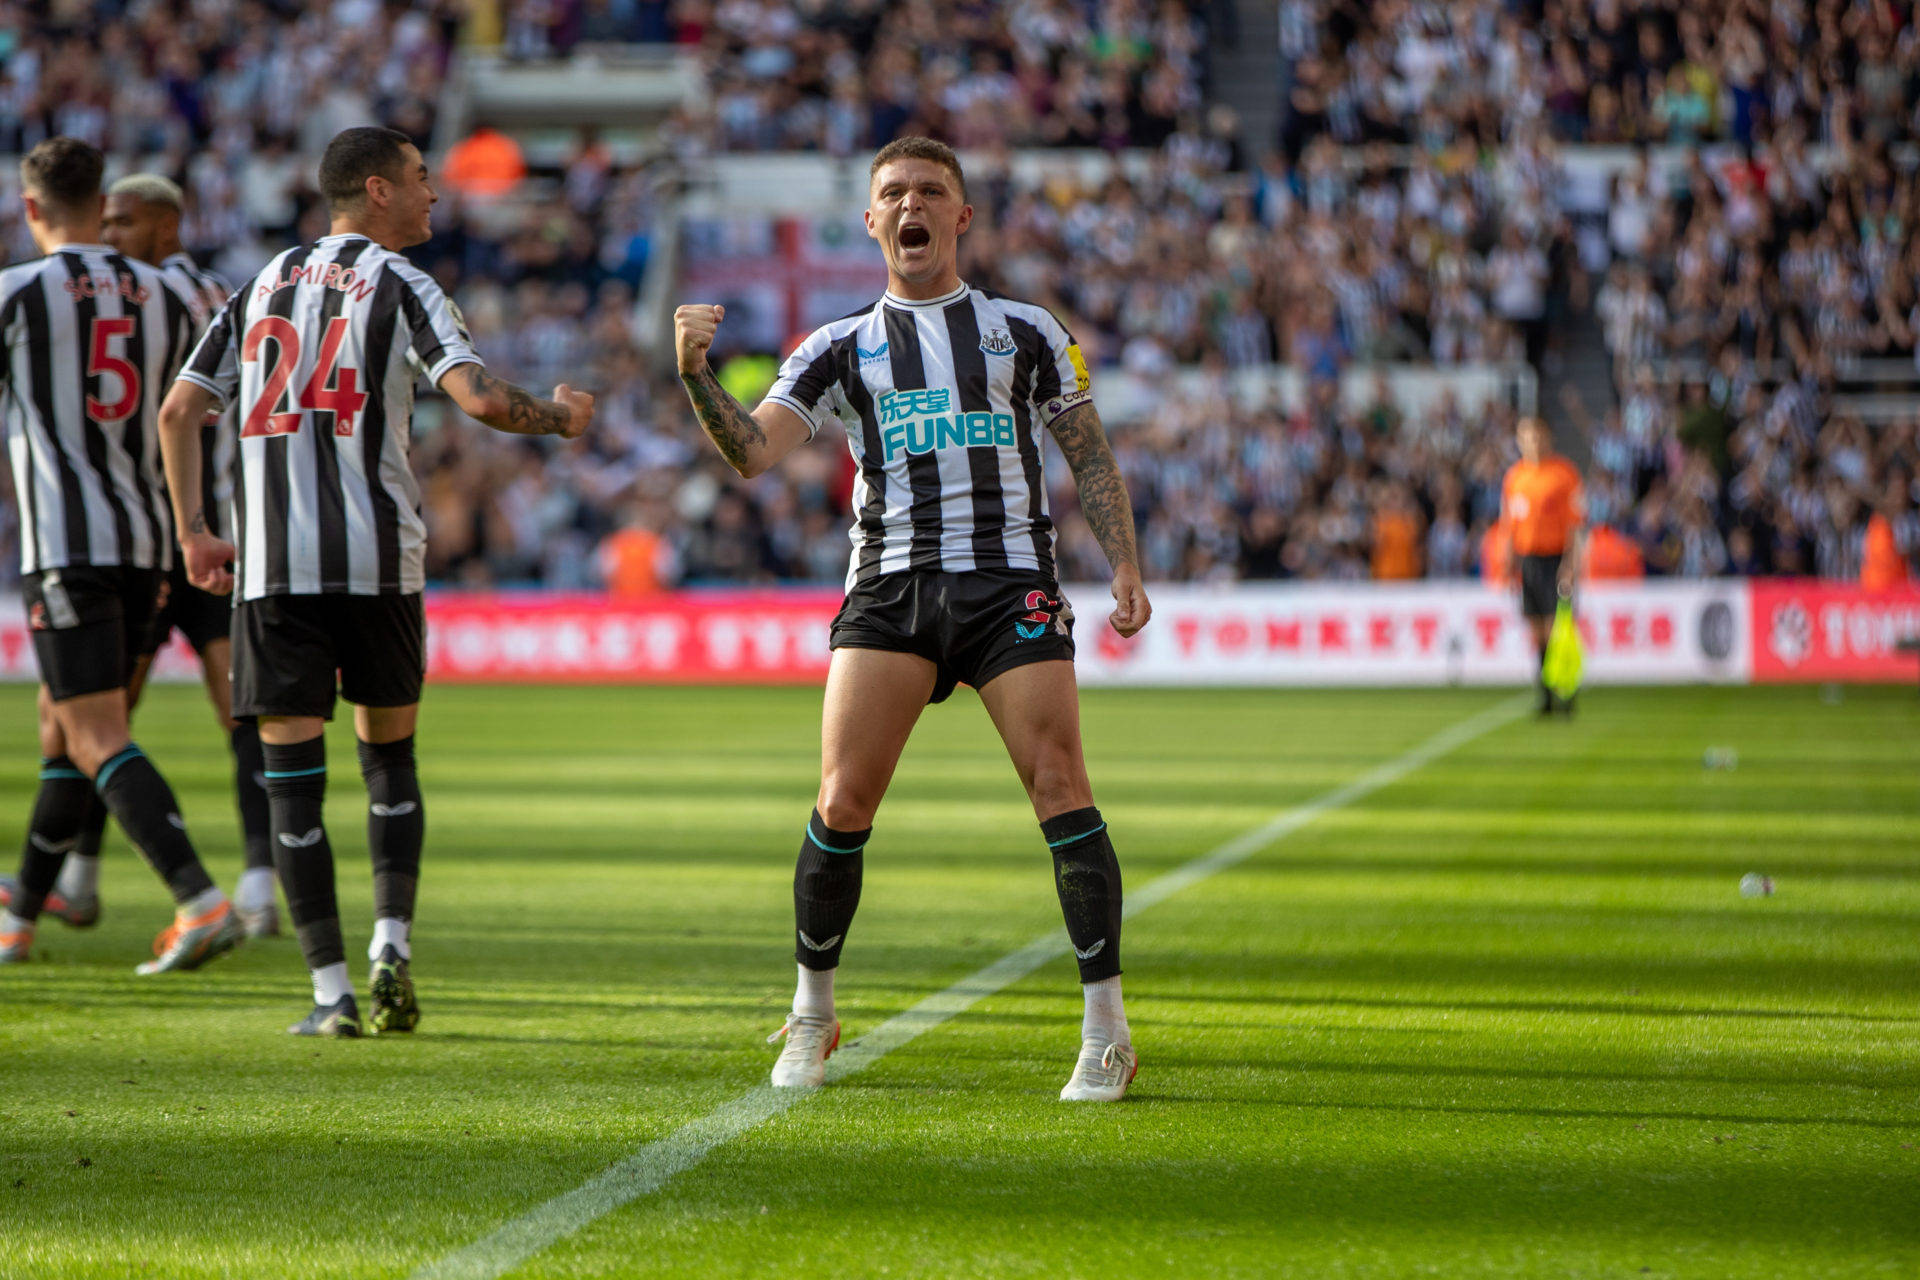 Newcastle United FC Player Cheering Wallpaper